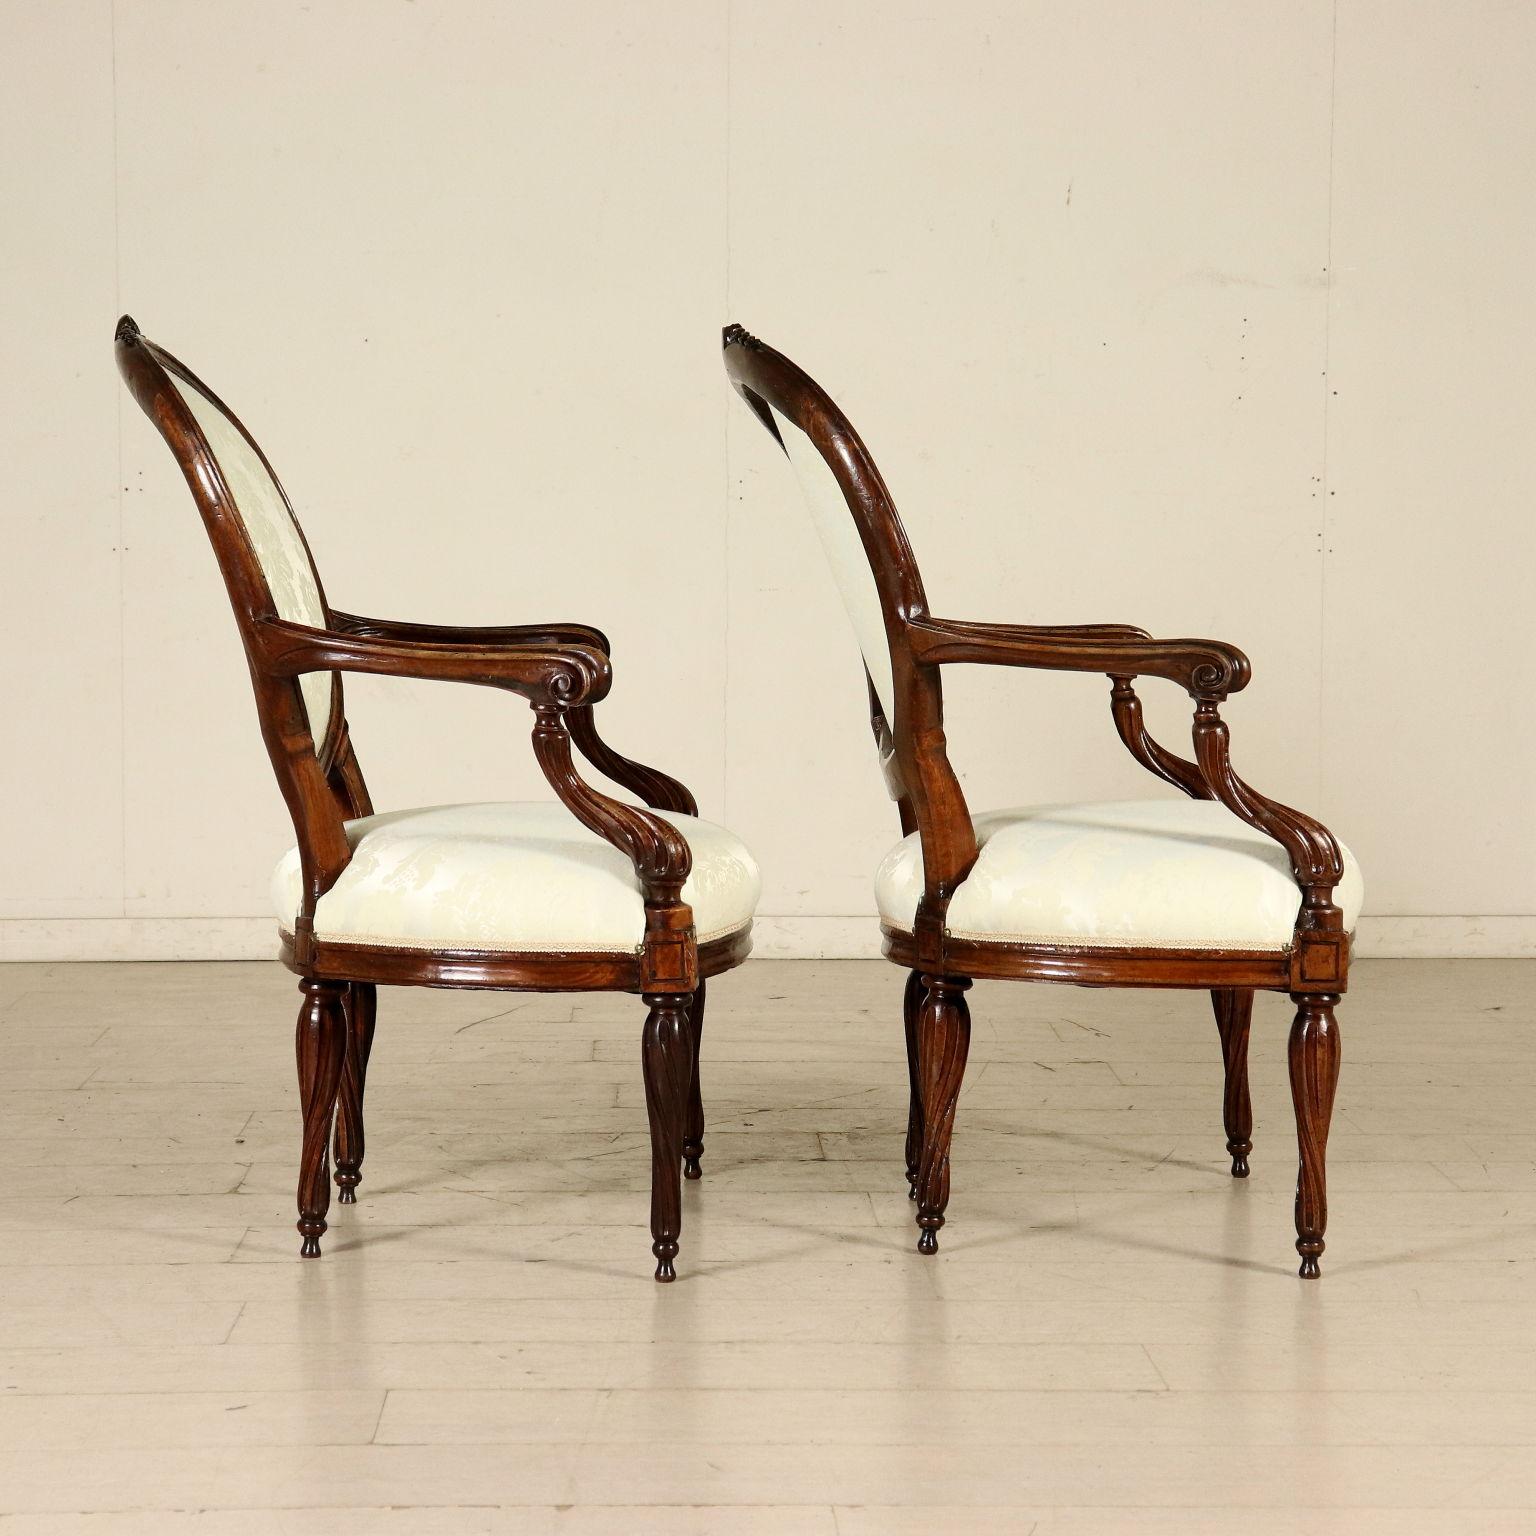 Neoclassical Pair of Armchairs from Genoa Solid Walnut, Italy, 18th Century